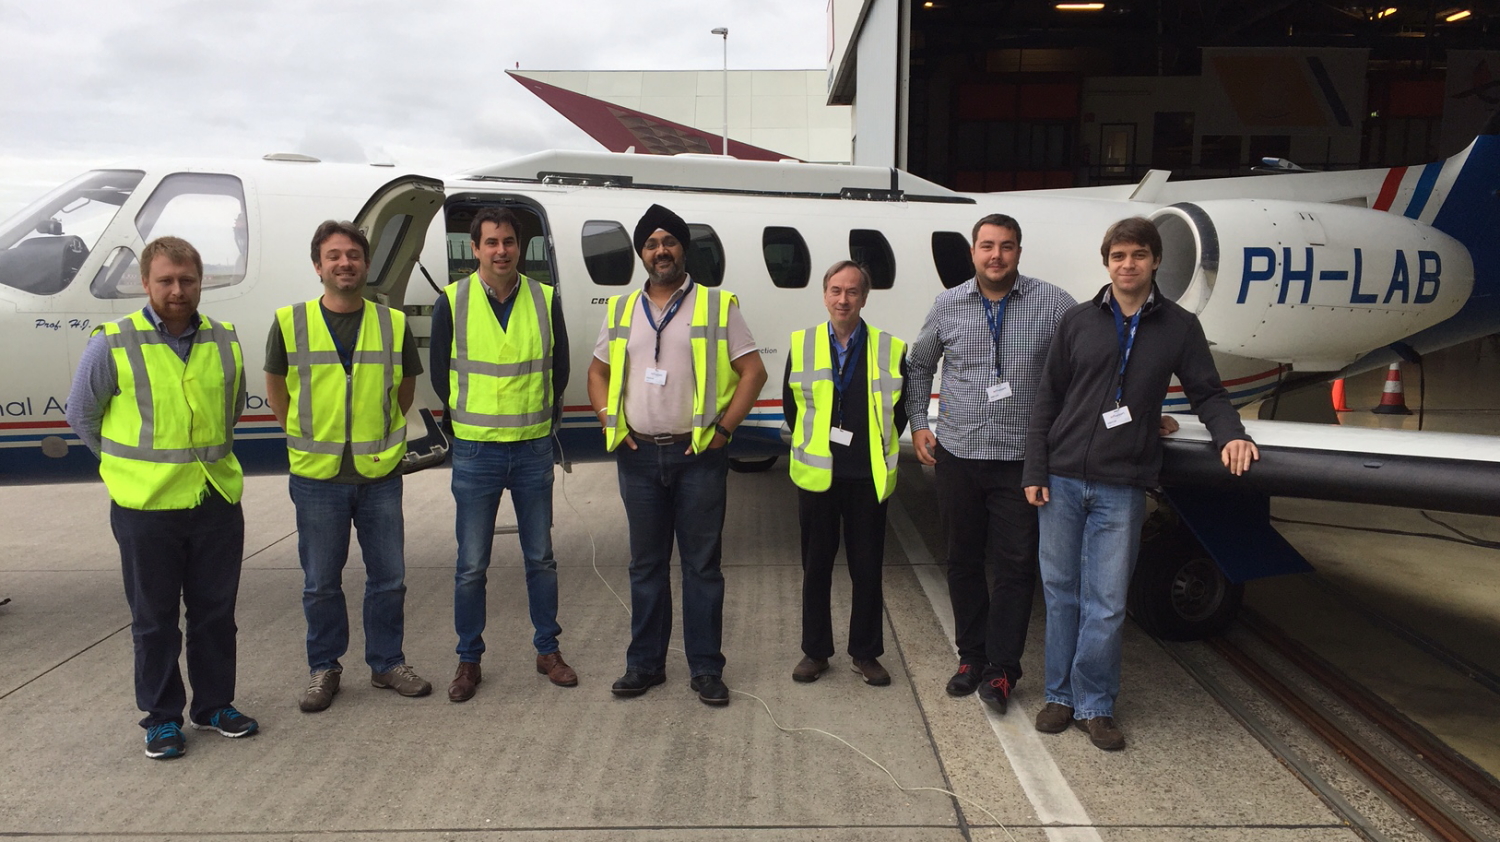 Team members from Inmarsat, the European Space Agency (ESA) and Honeywell during recent test flights for the Iris Precursor air traffic modernisation project